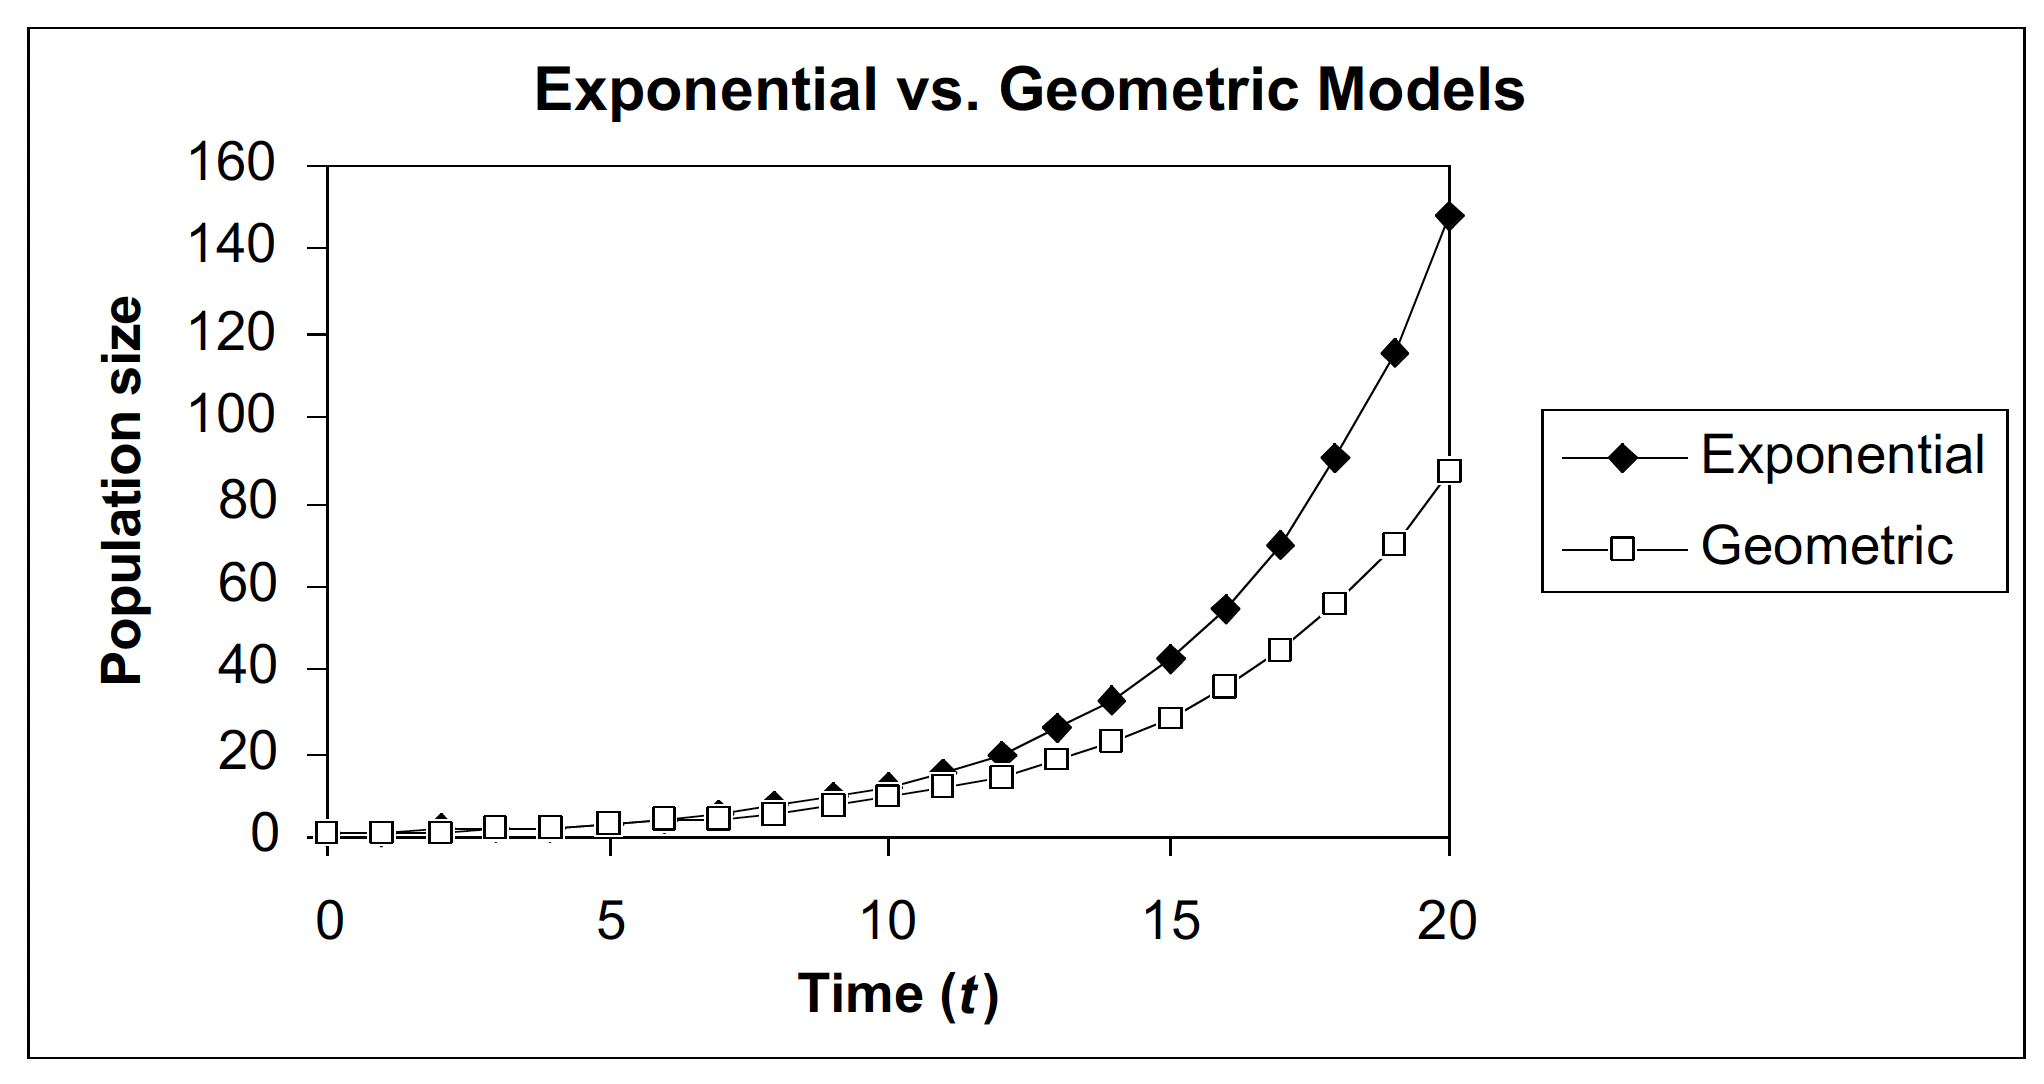 A graph shows the difference between exponential and geometric growth models with time by population size. After about seven years, the exponential model overtakes the geometric model with a larger population size and the difference between the population size of the models increases over time.